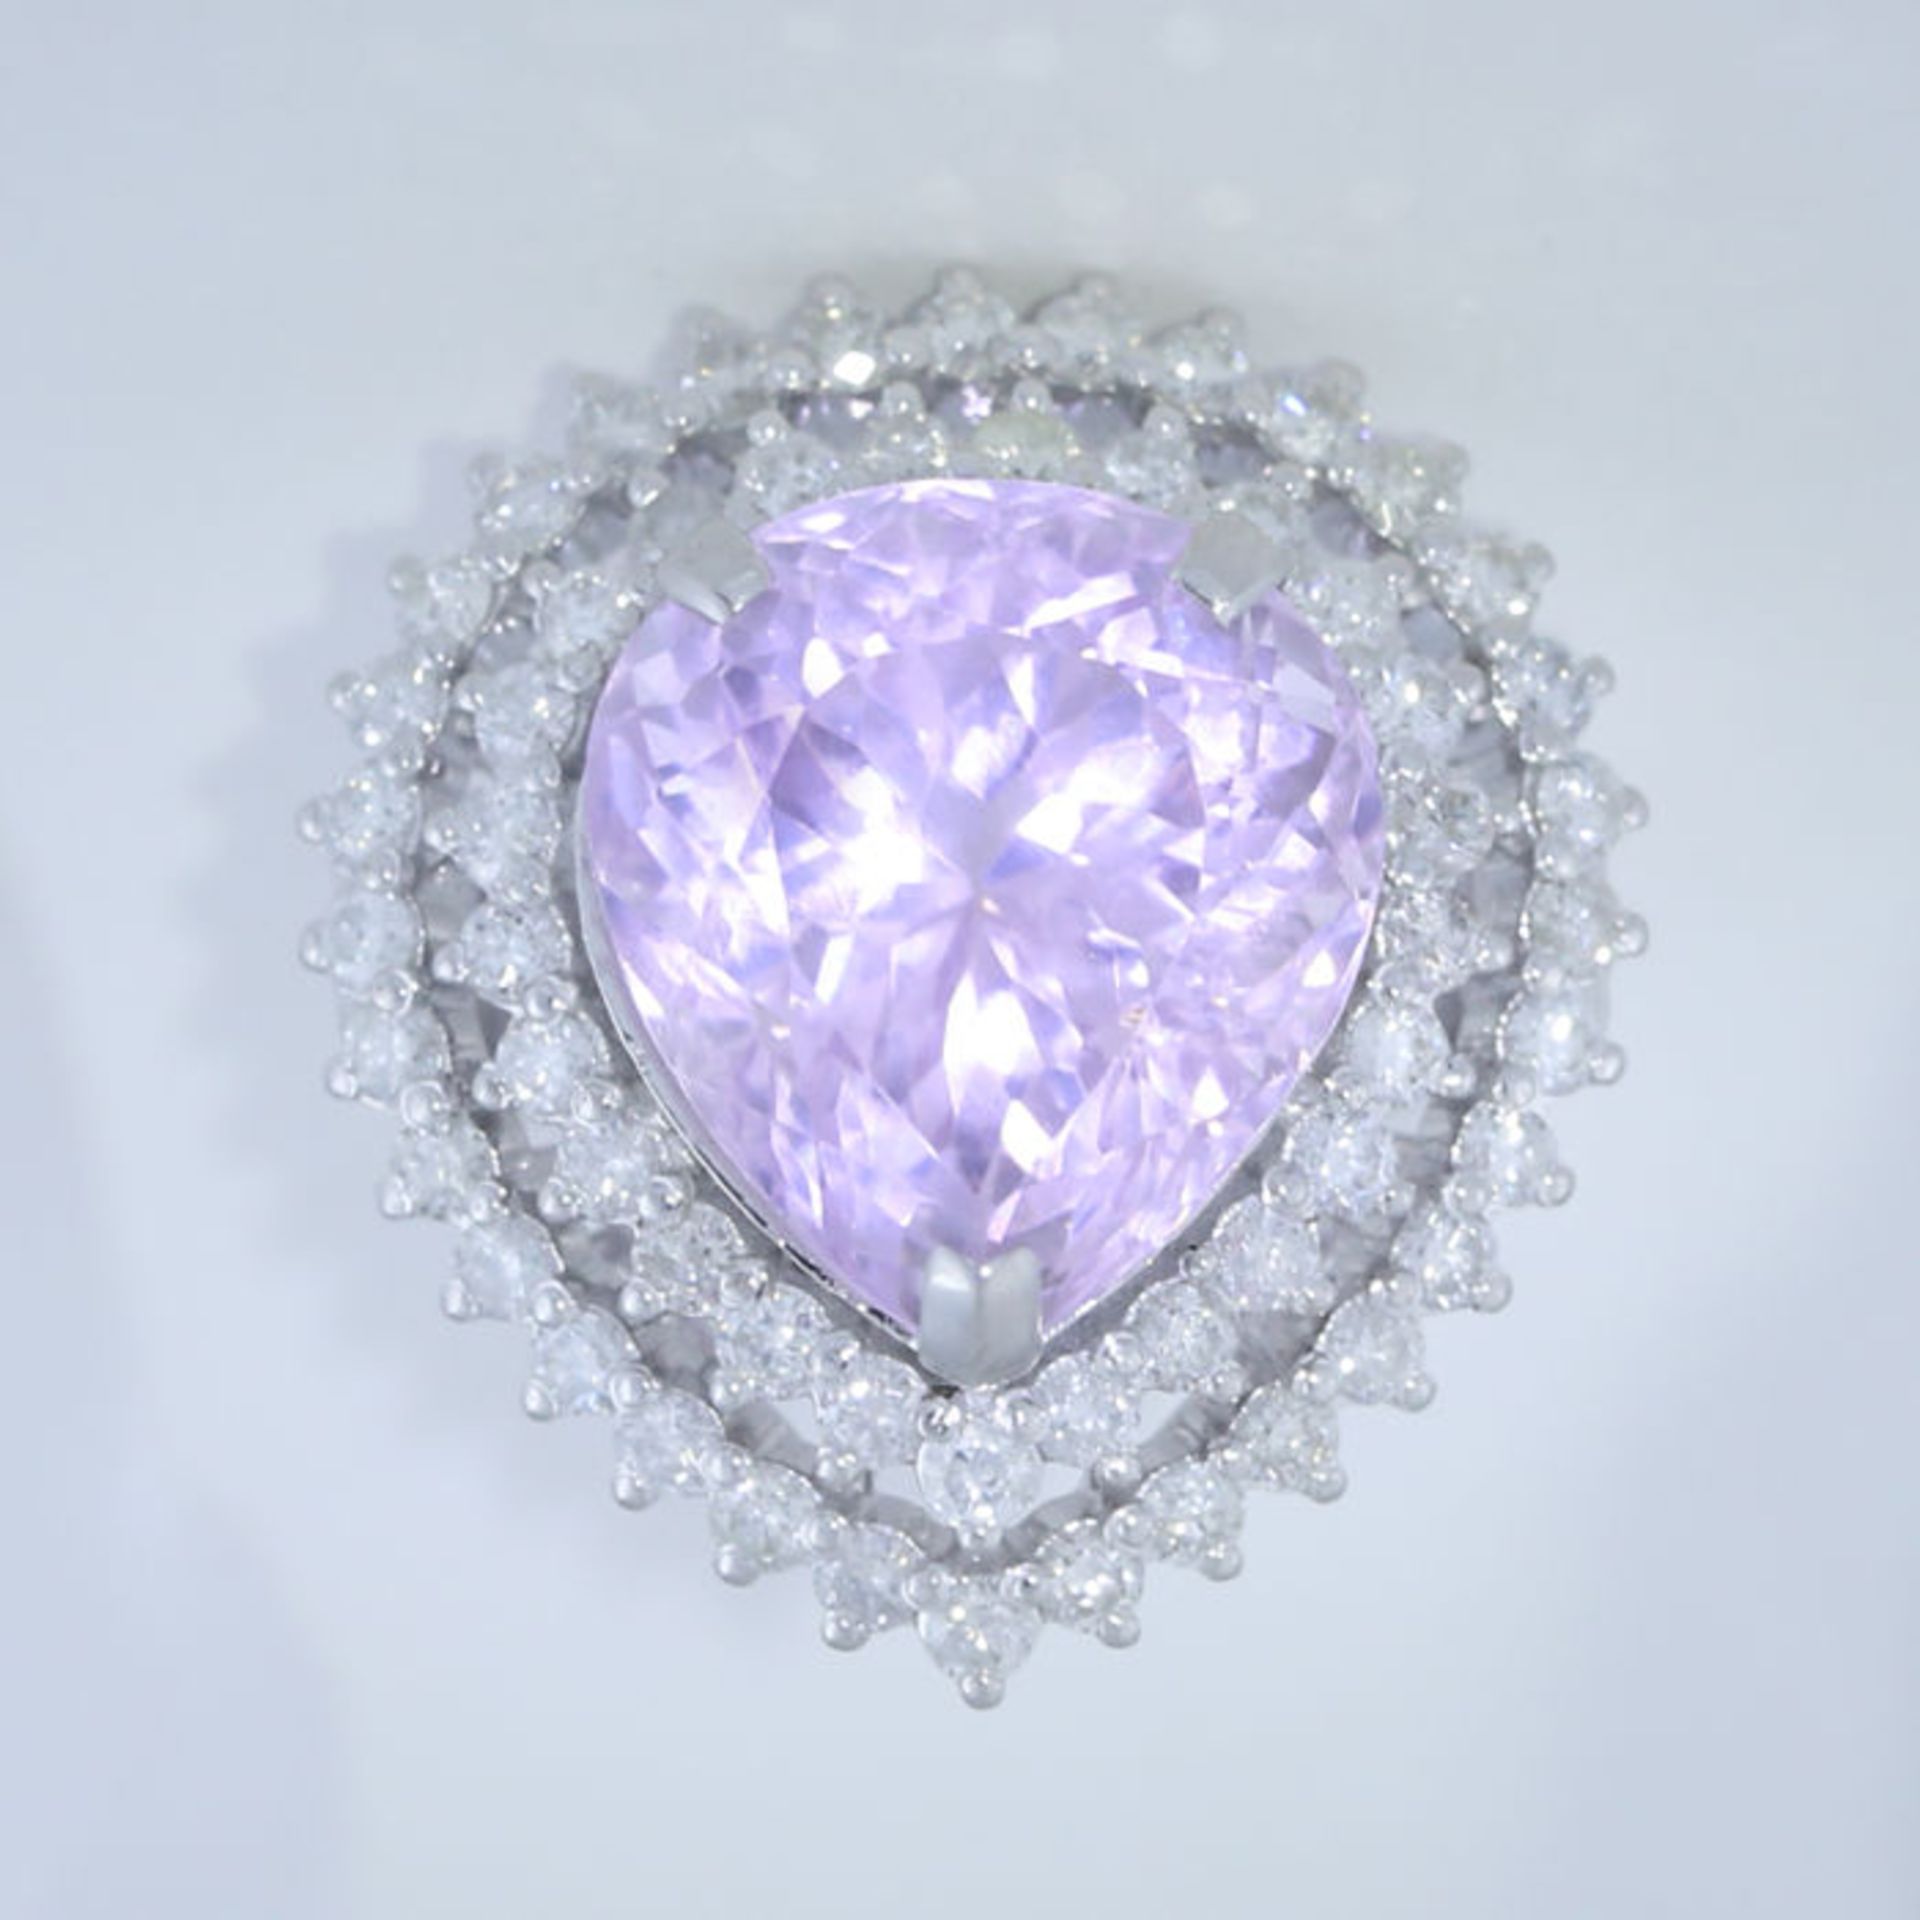 14 K / 585 White Gold Very Unique Large Kunzite (IGI Certified) and Diamond Cocktail Ring